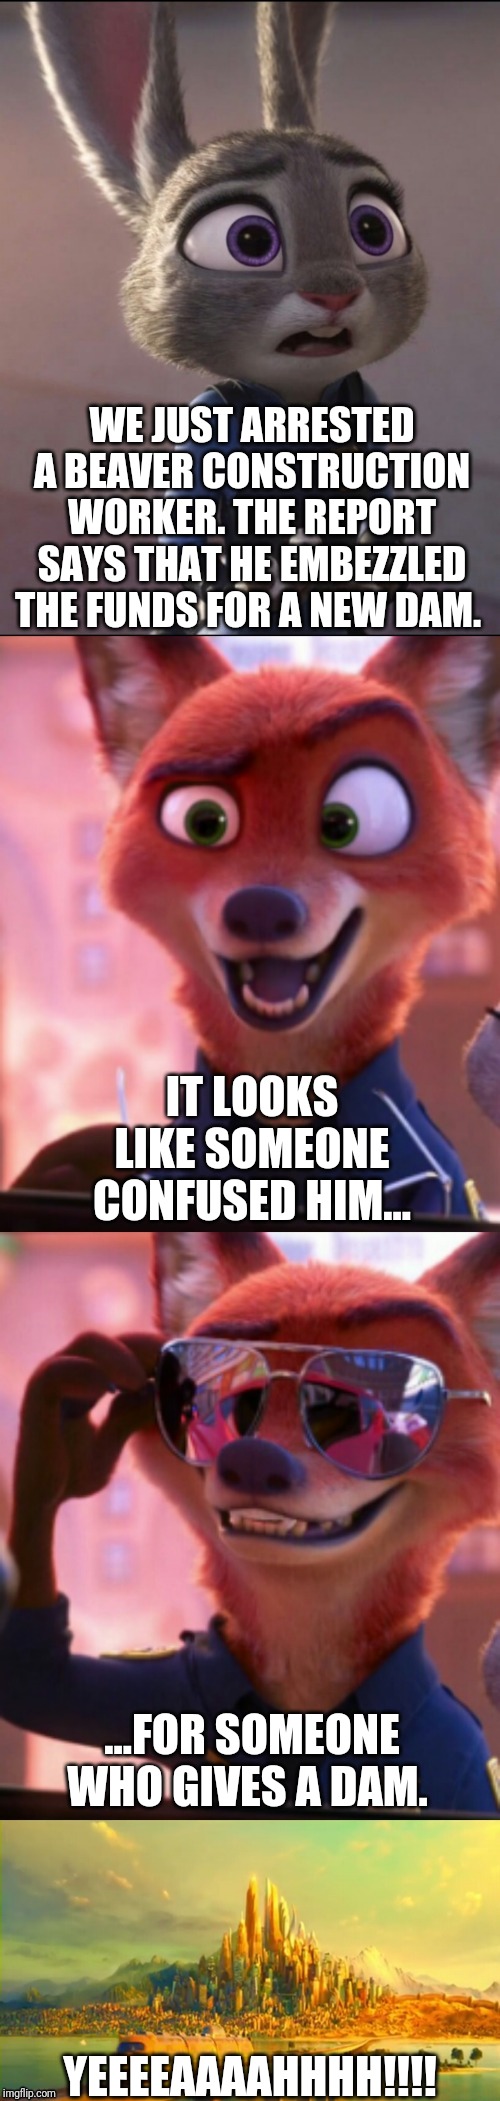 CSI: Zootopia 21 | WE JUST ARRESTED A BEAVER CONSTRUCTION WORKER. THE REPORT SAYS THAT HE EMBEZZLED THE FUNDS FOR A NEW DAM. IT LOOKS LIKE SOMEONE CONFUSED HIM... ...FOR SOMEONE WHO GIVES A DAM. YEEEEAAAAHHHH!!!! | image tagged in csi zootopia,zootopia,judy hopps,nick wilde,parody,funny | made w/ Imgflip meme maker